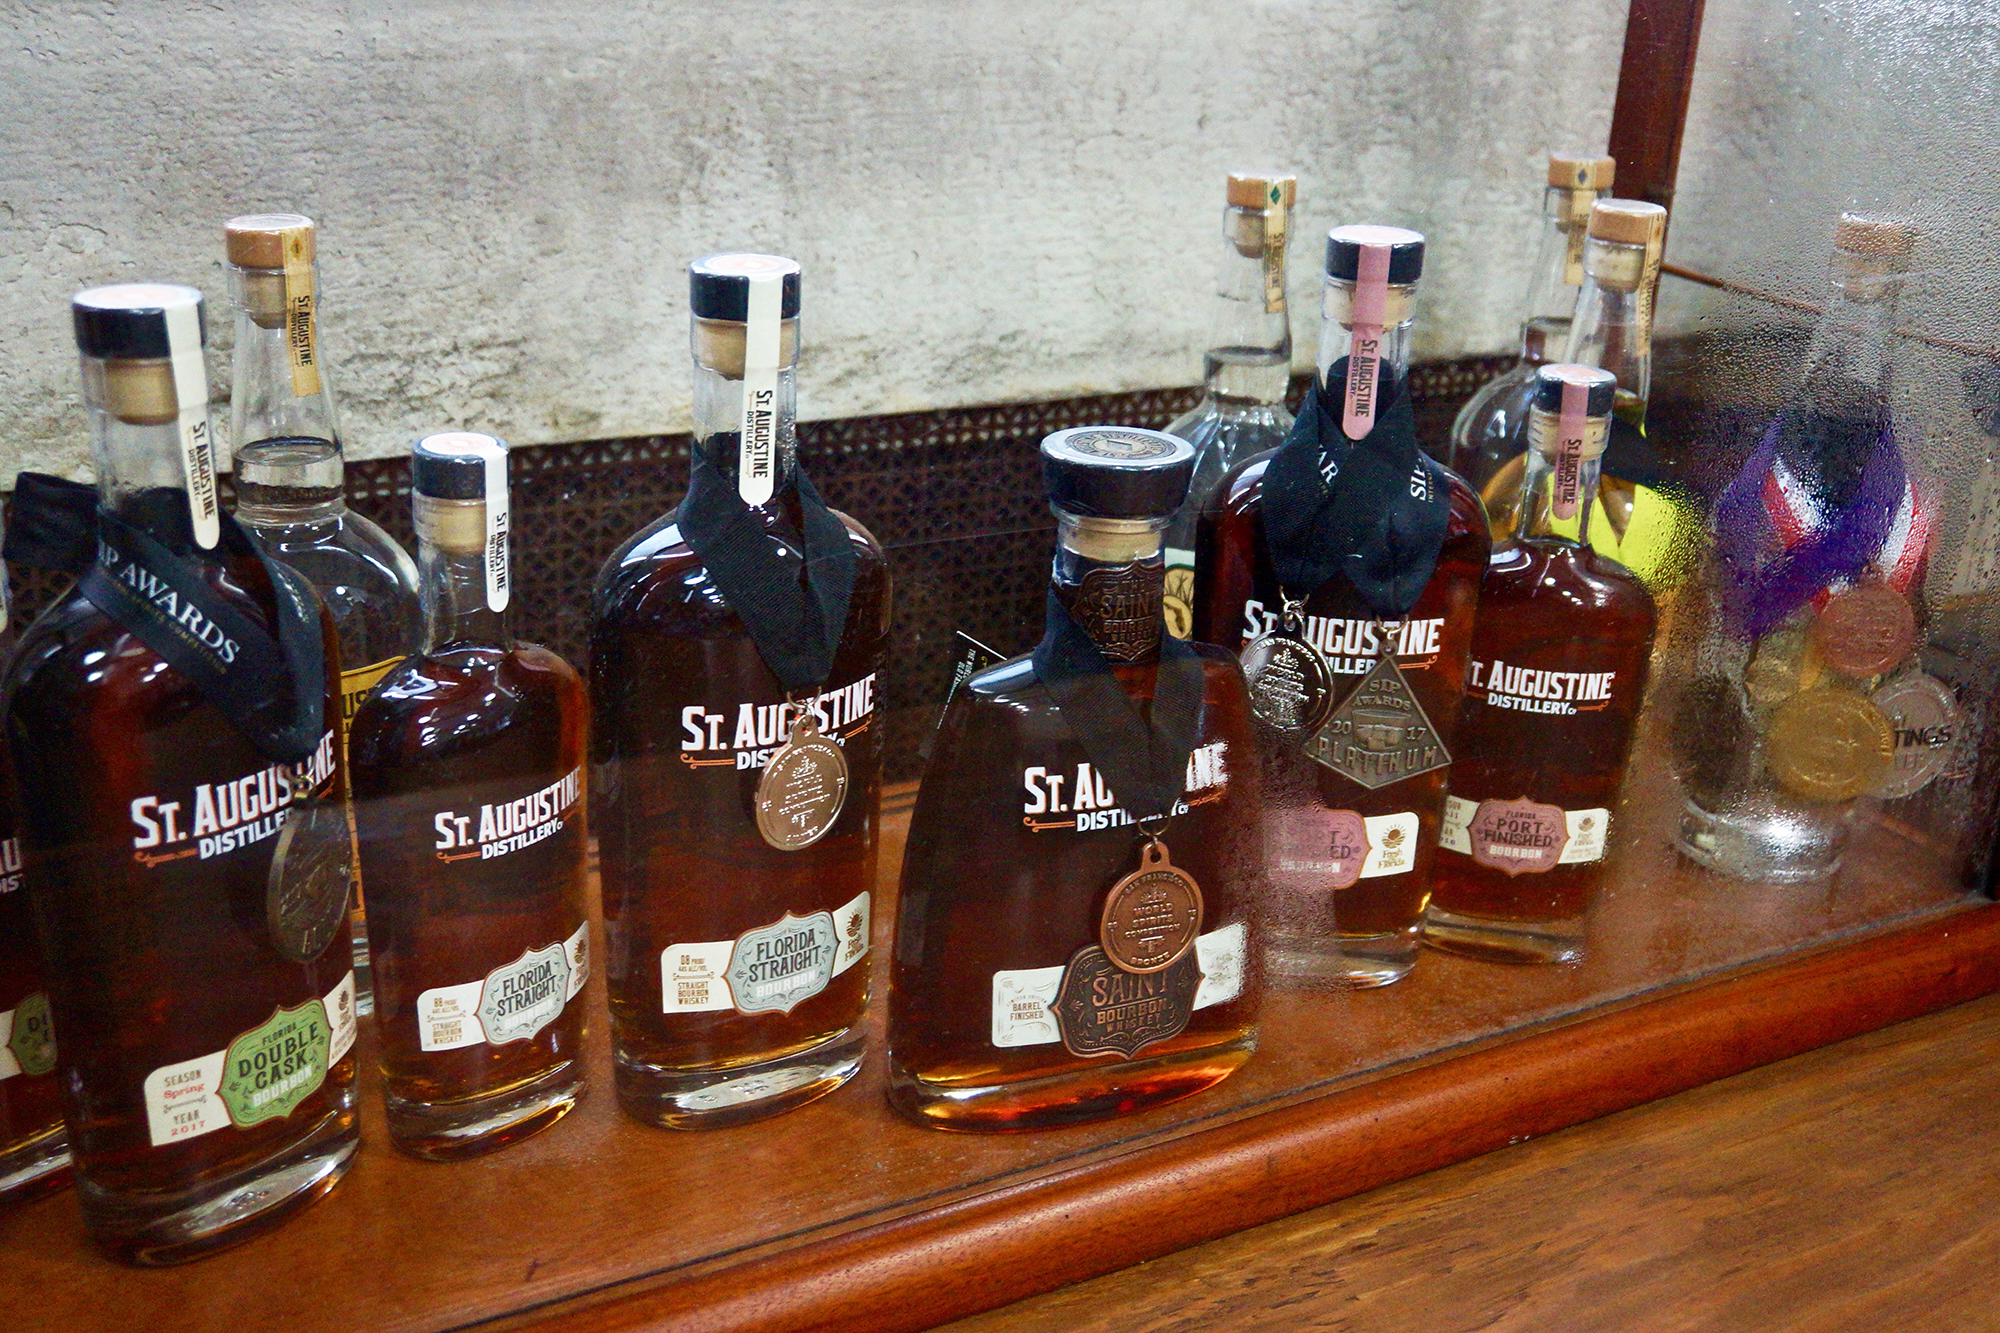 Offerings from St. Augustine Distillery.